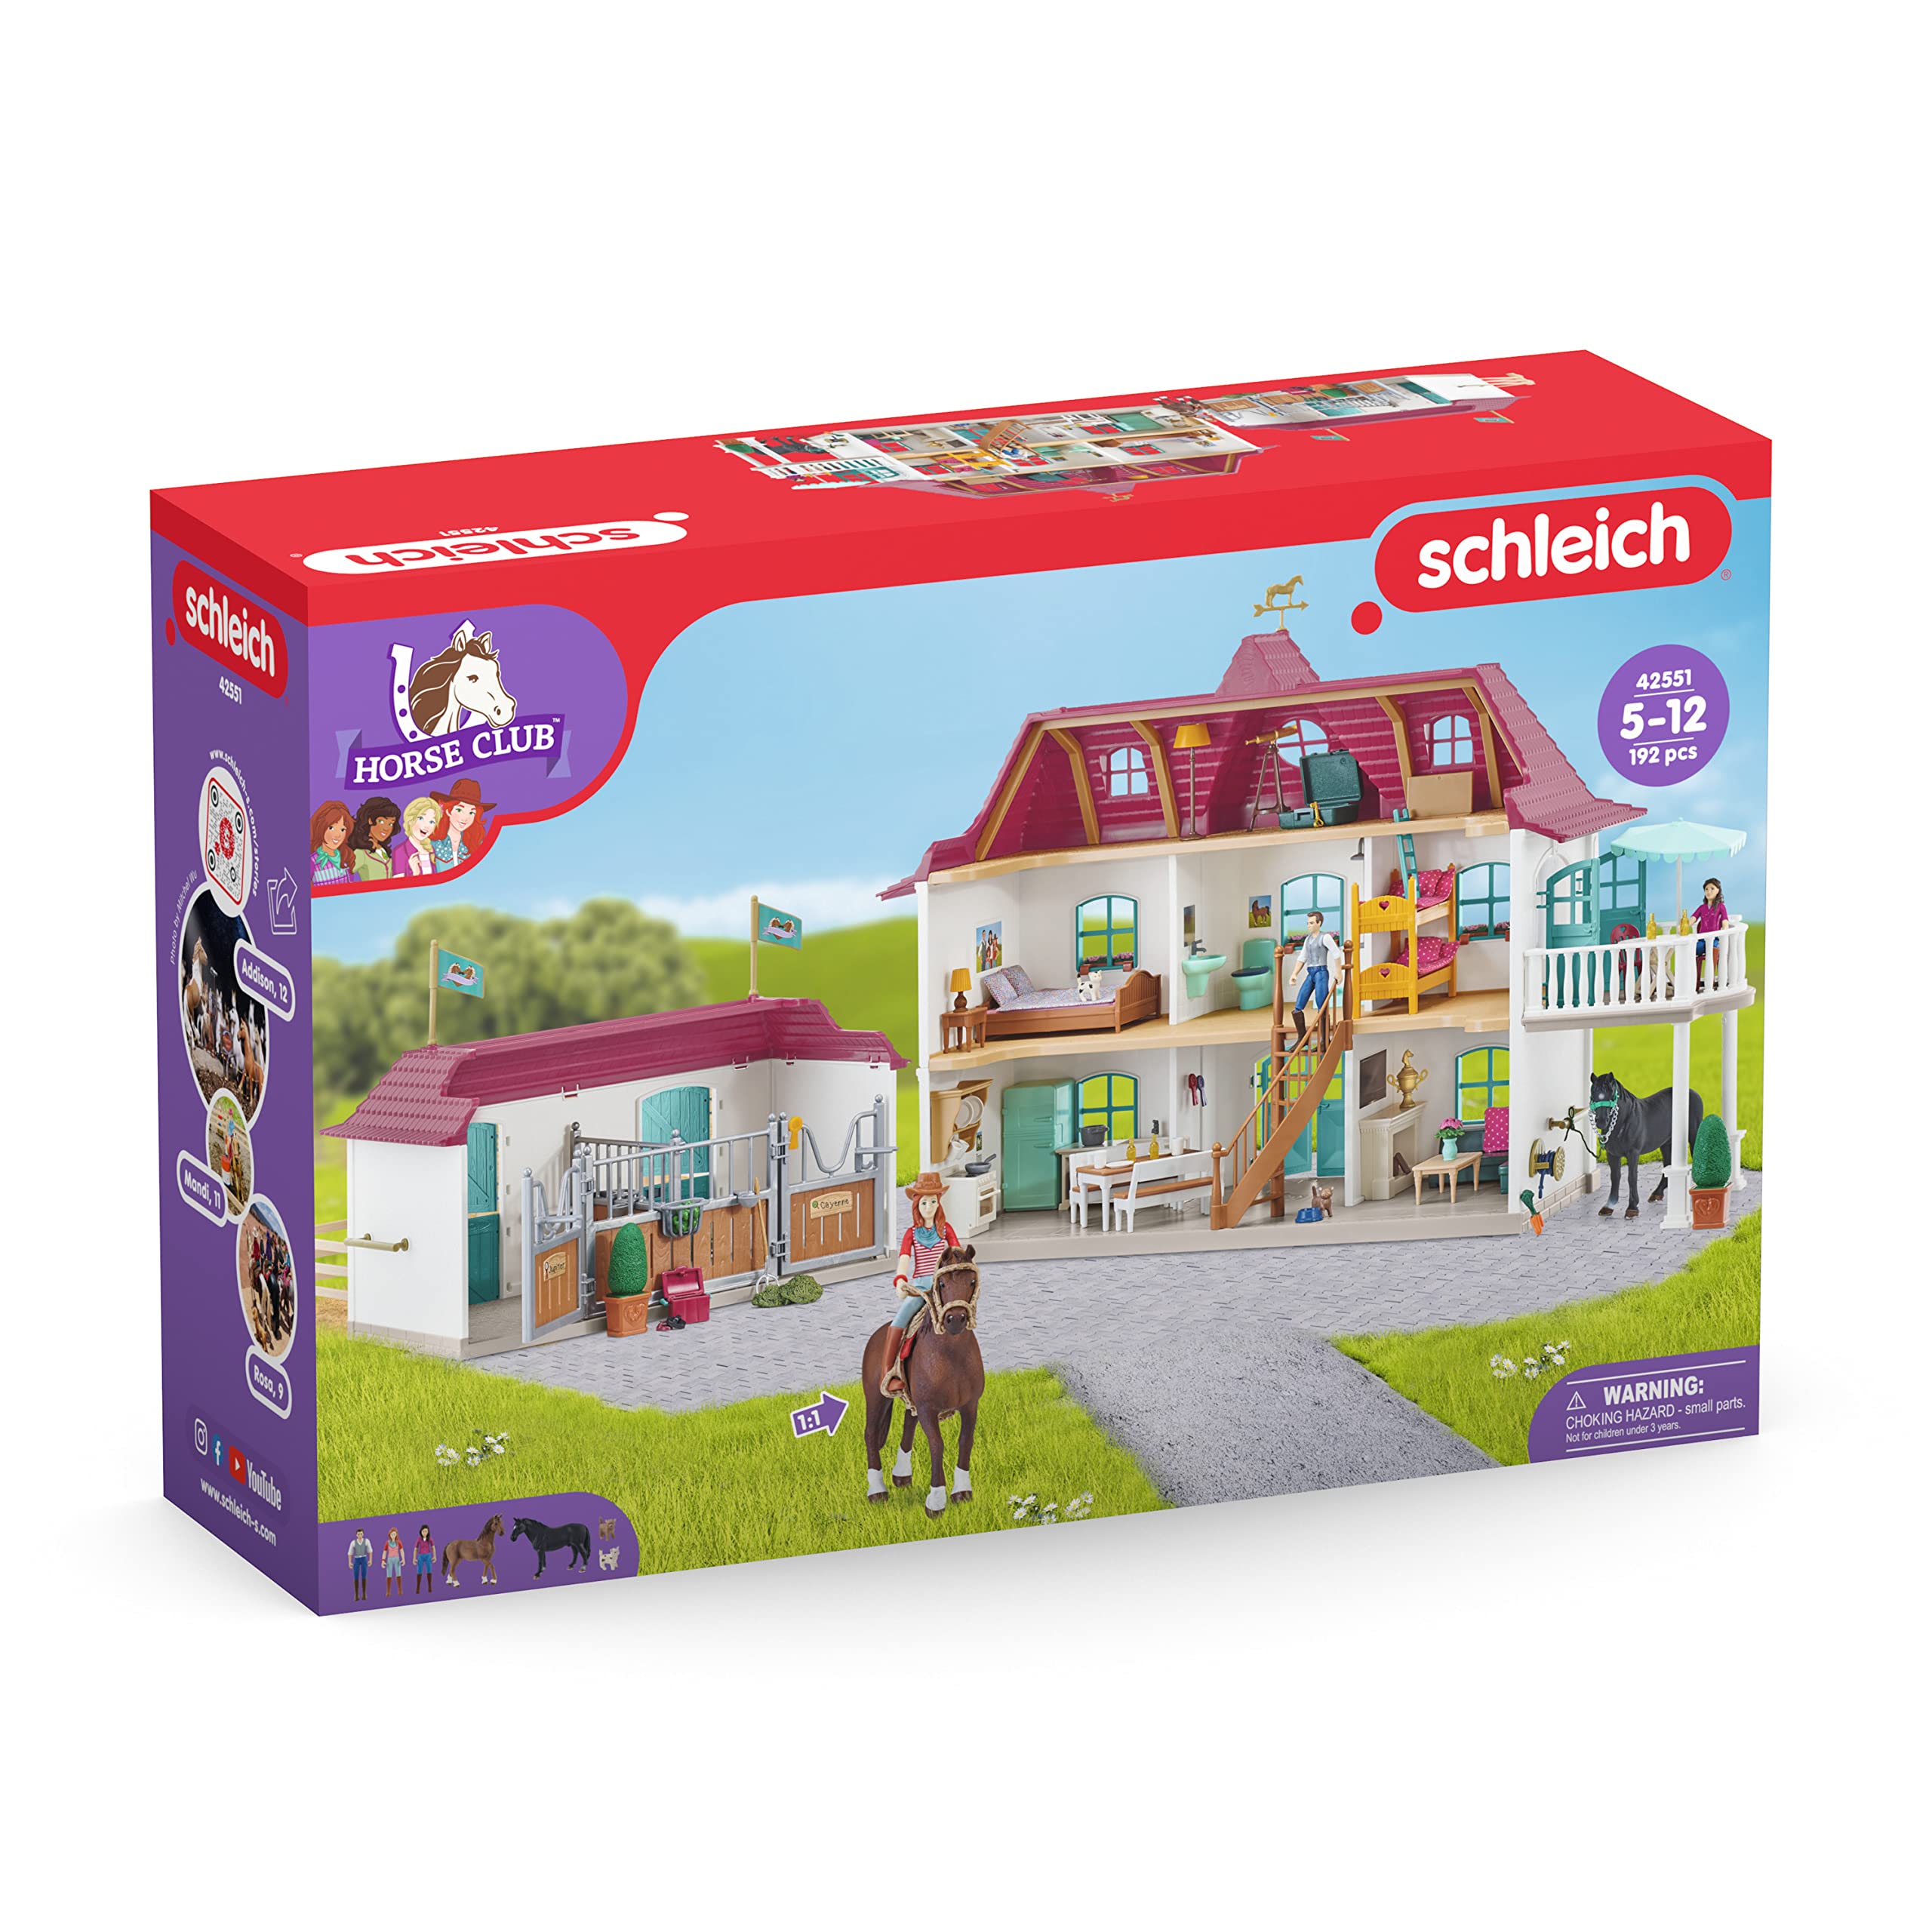 Schleich Horse Toys and Playsets, Award Winning 108 Piece Set Lakeside Country House, Horse Stable, Pony Figurines, Rider Action Figures, and Barn Accessories, for Girls and Boys Ages 5 and Above